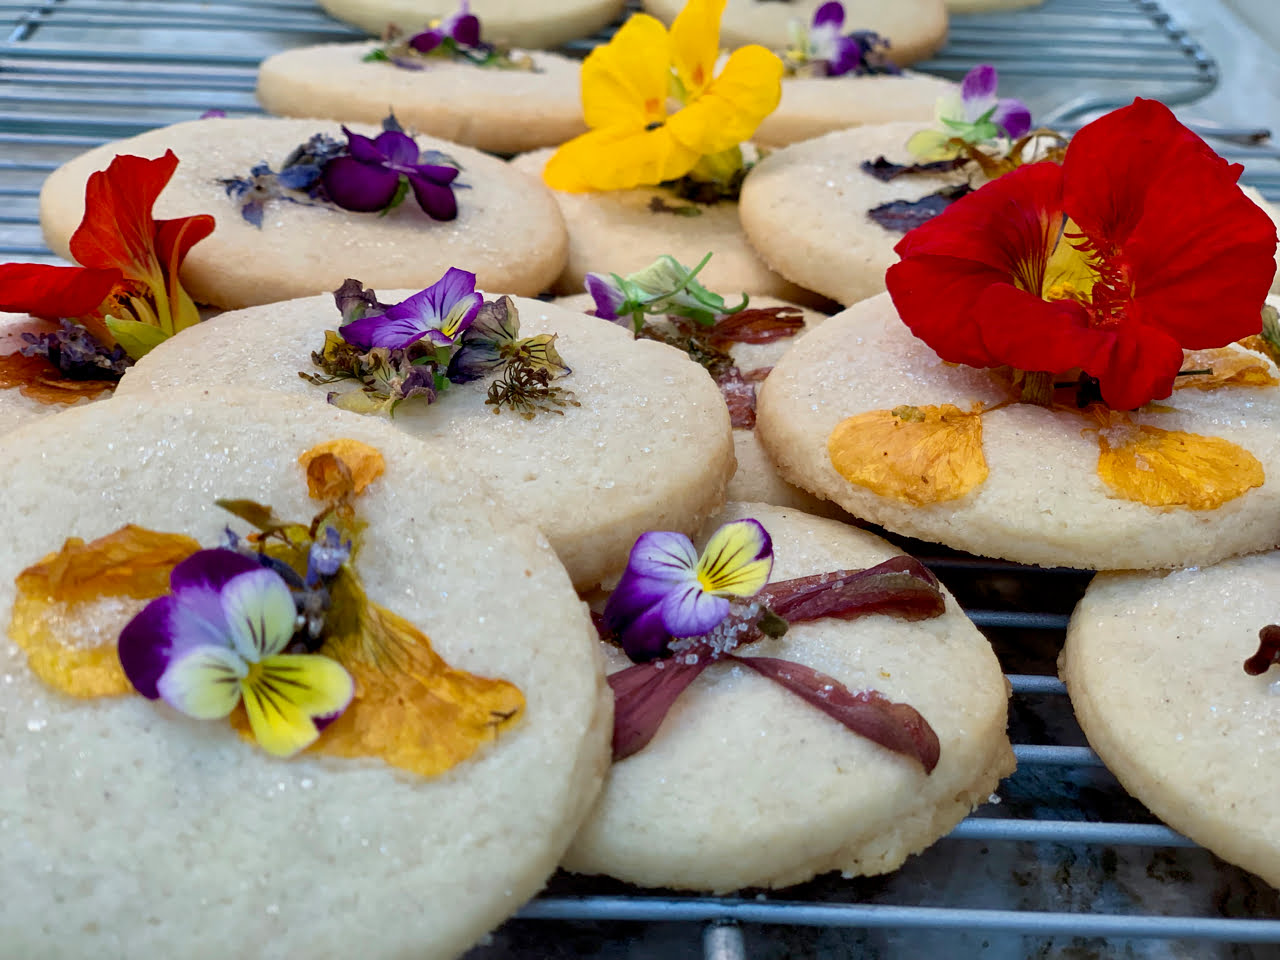 Edible Flower Recipes - Cooking with Flowers